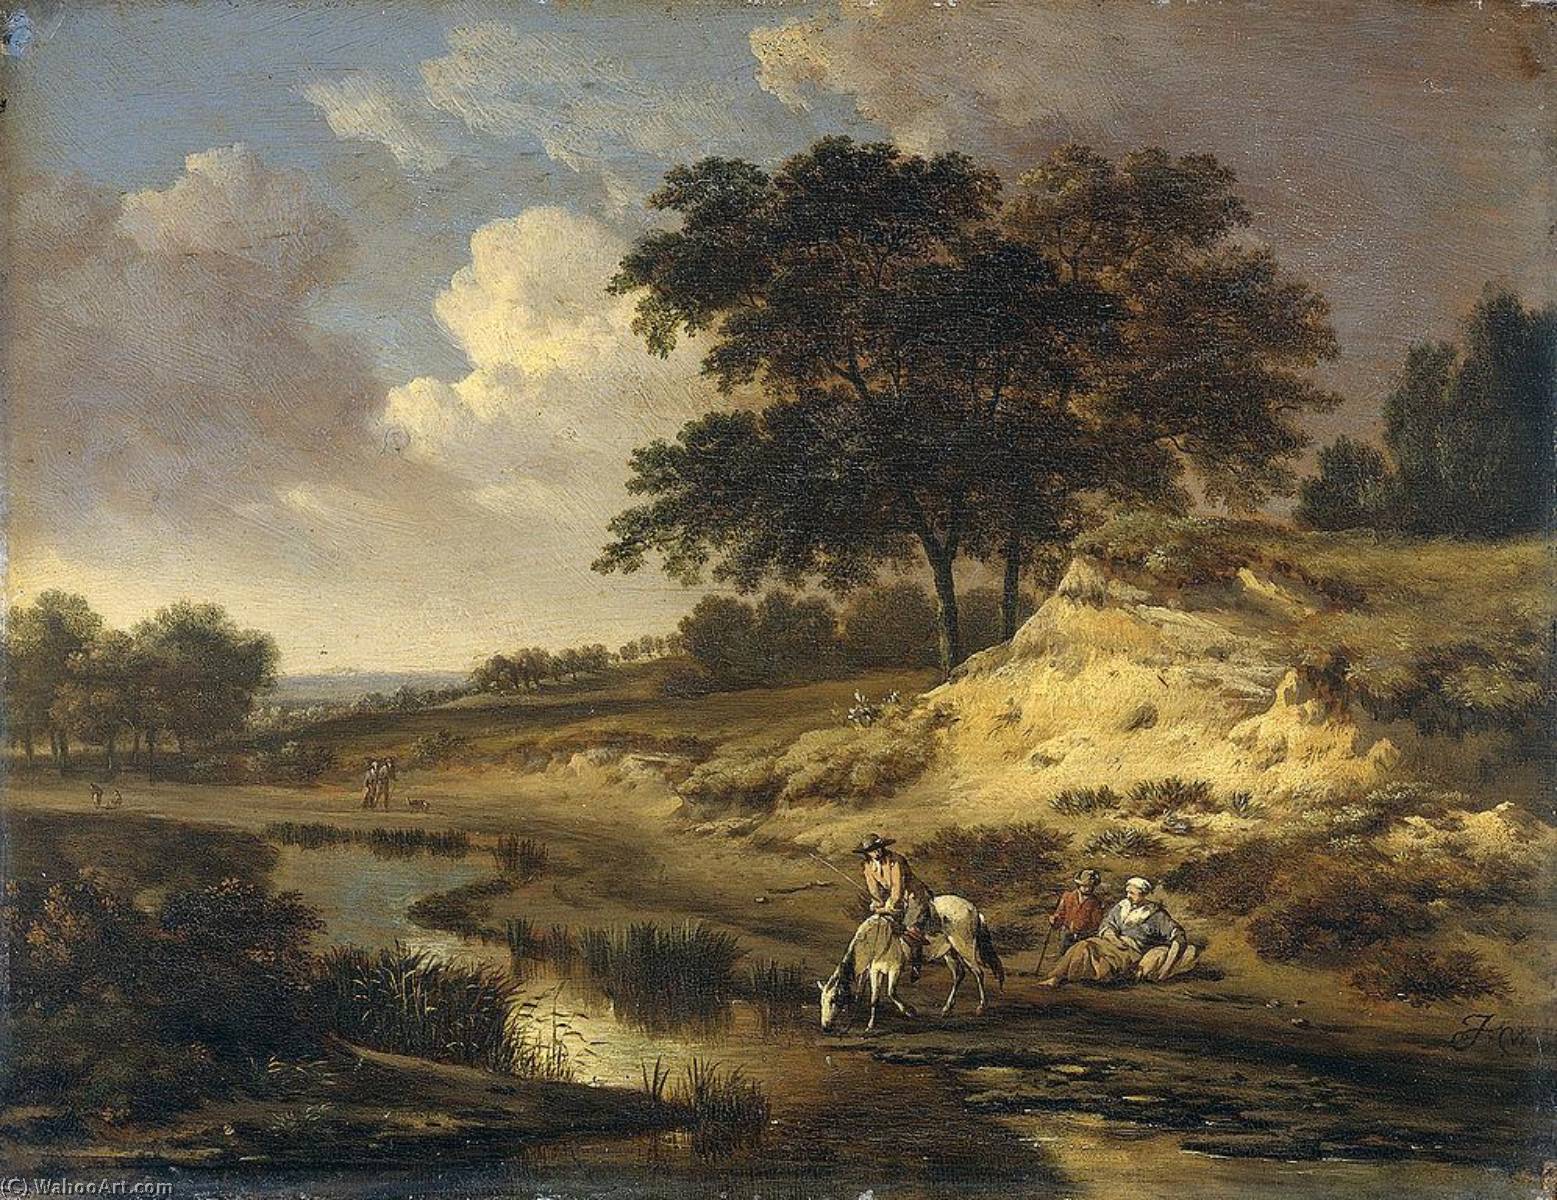 WikiOO.org - 백과 사전 - 회화, 삽화 Jan Jansz Wijnants - Landscape with a Rider Watering His Horse